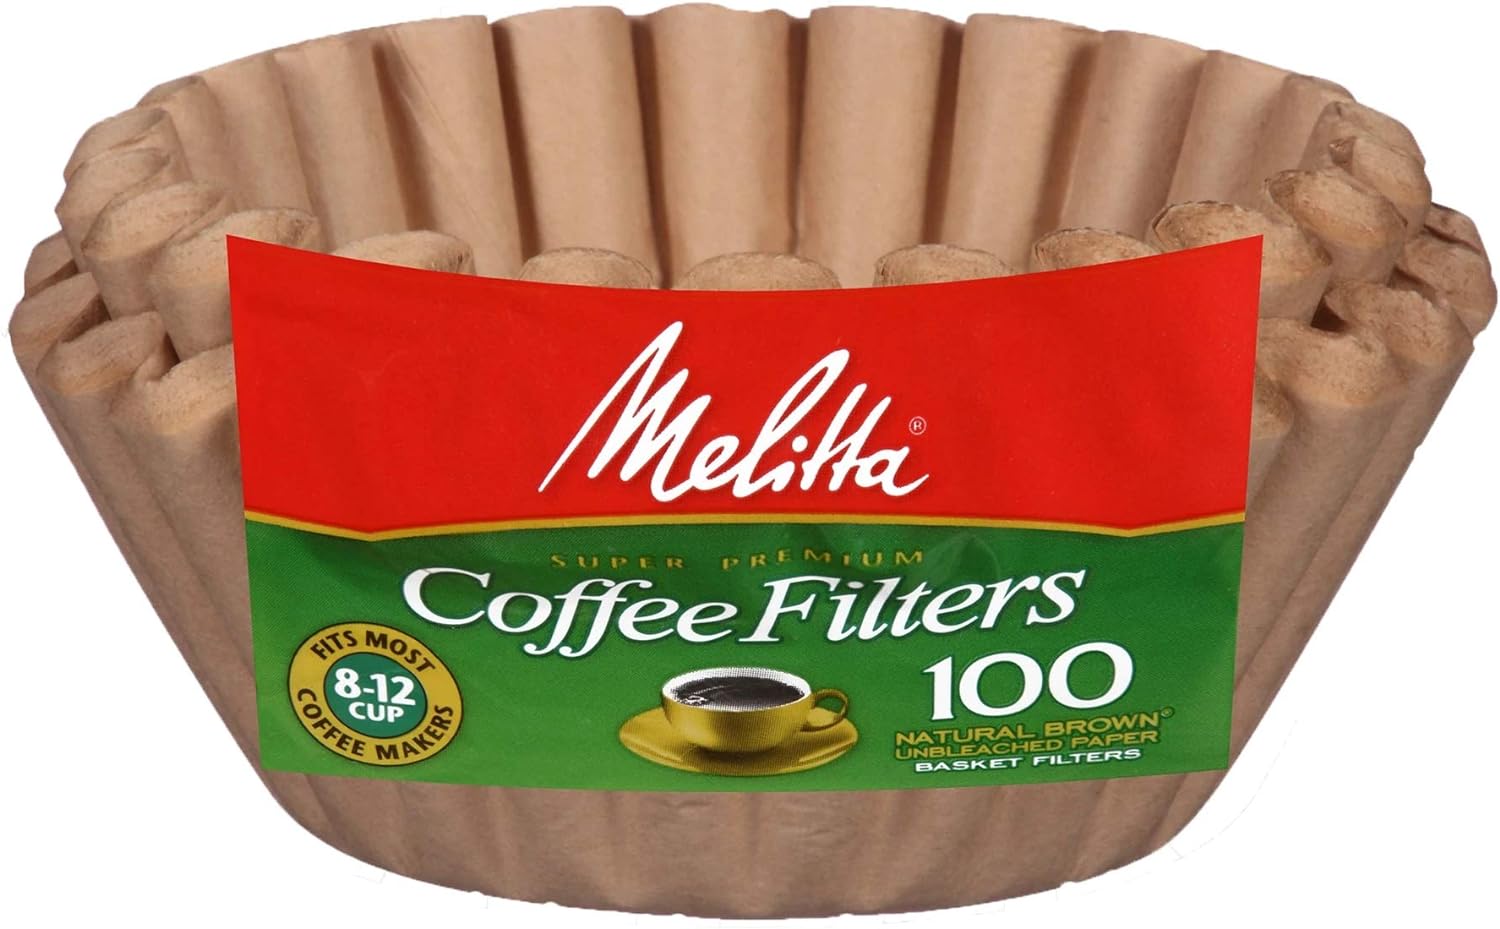 We love our Mr coffee. We love our mr coffee filters. We love the fact they're not bleached. There are reasonable price. And again it' Mr coffee. Does it get any better than that I don't think so.